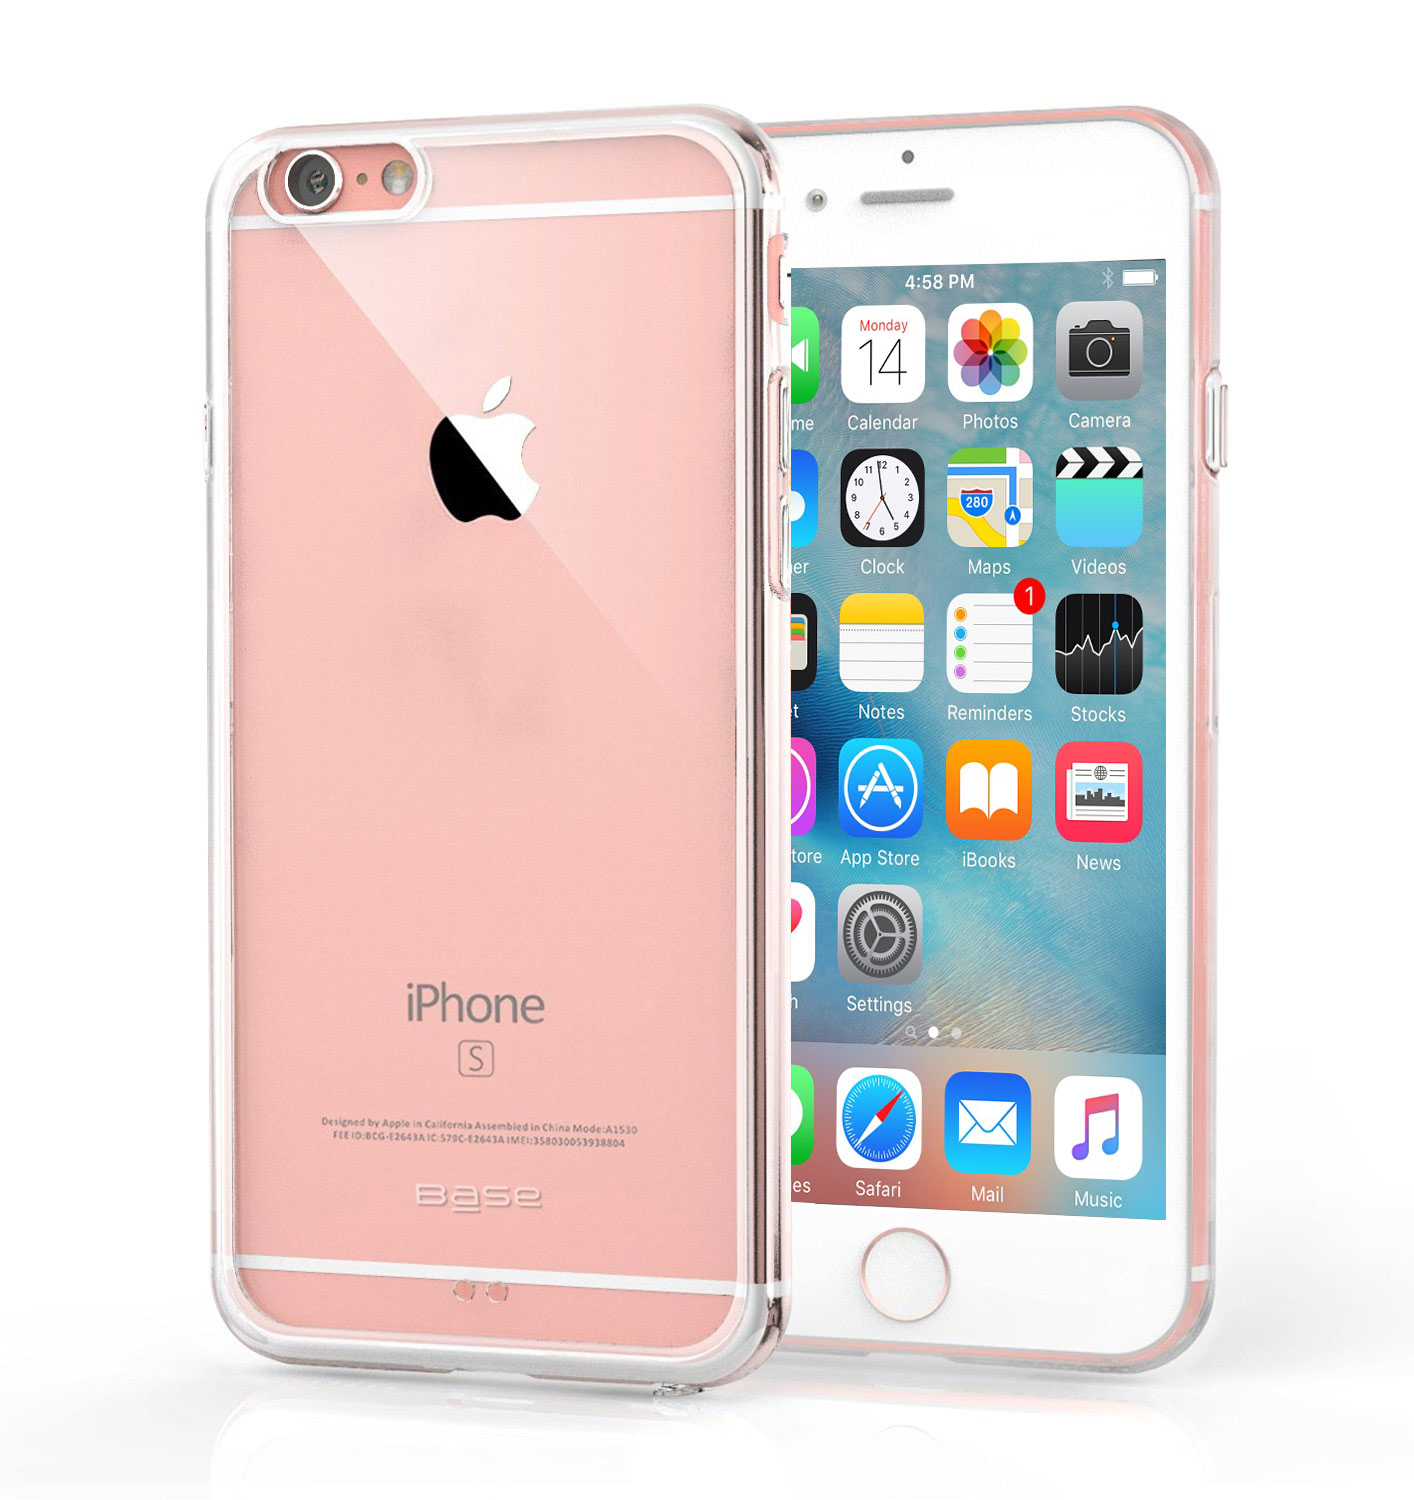 iPhone 6 Crystal Clear Slim Protective Case Online - Power Peak Products